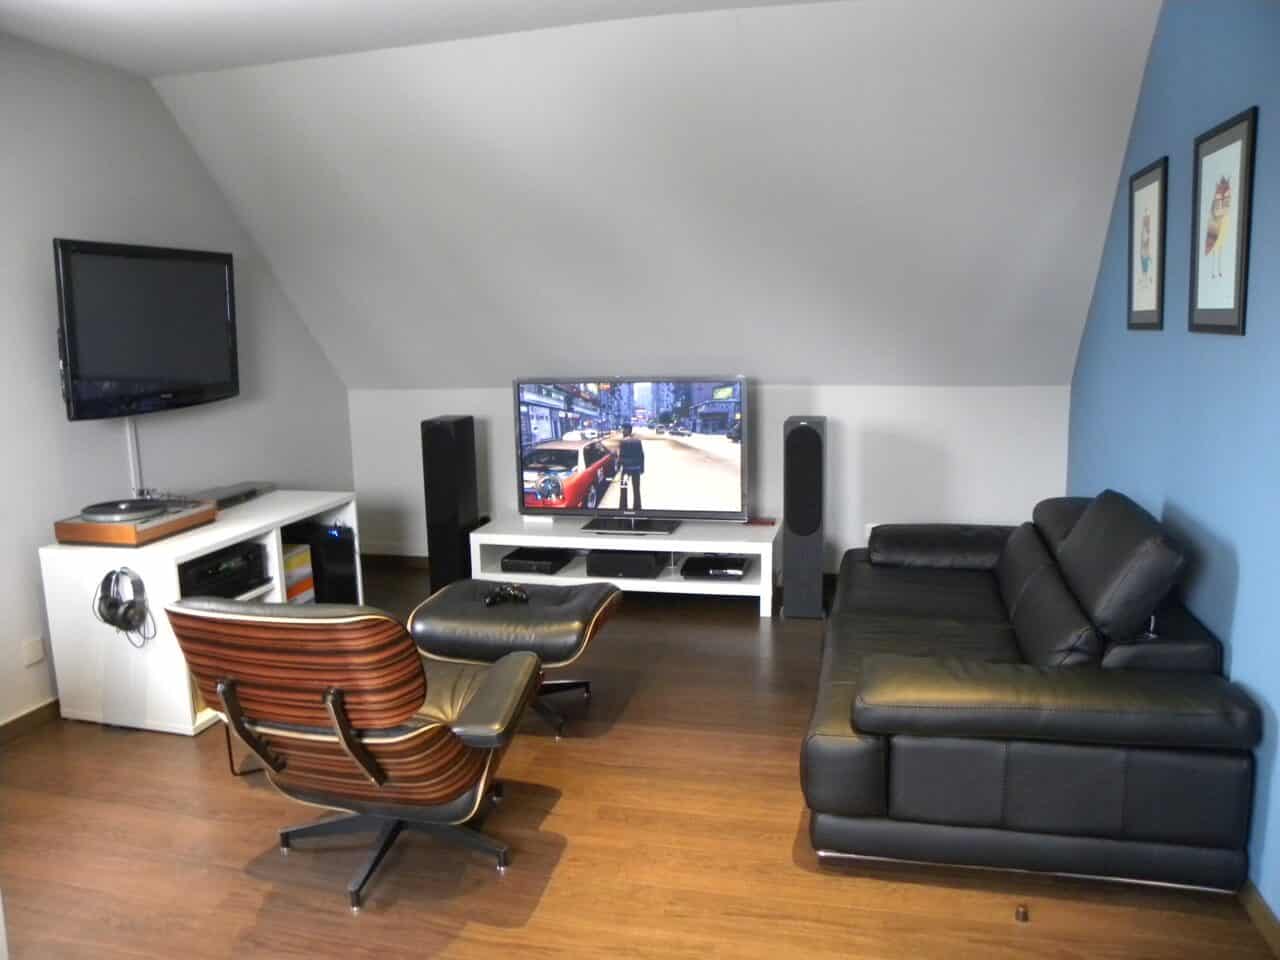 ideas for game room in basement